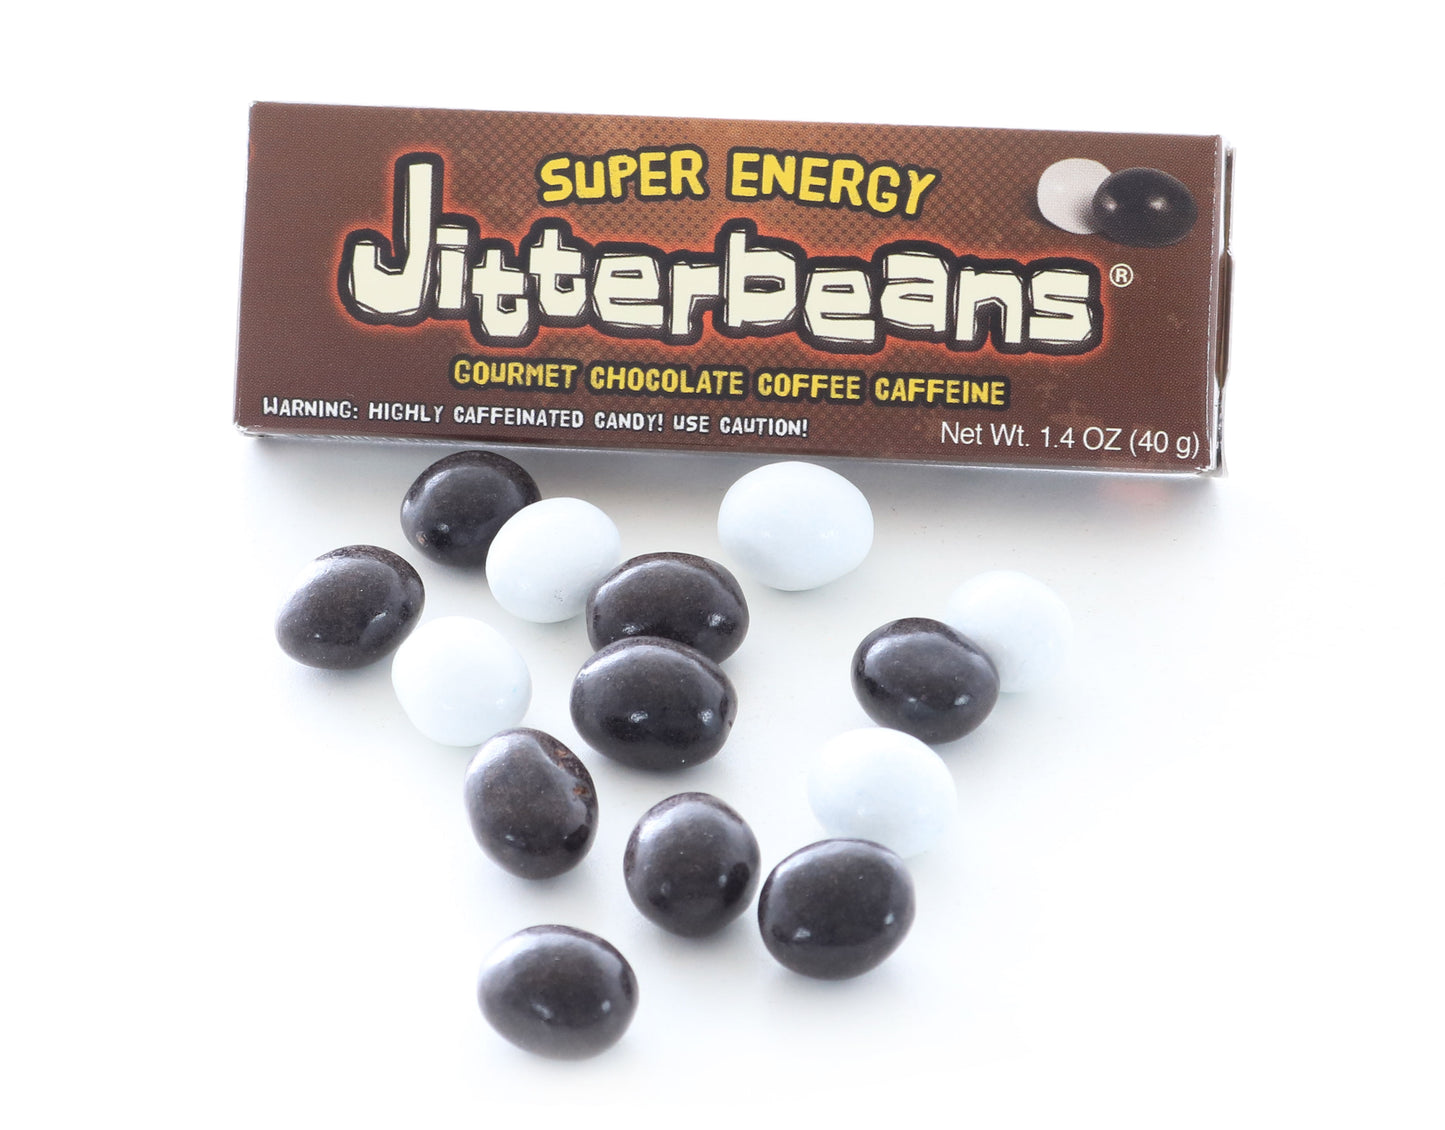 1.4 ounces of chocolate covered coffee beans